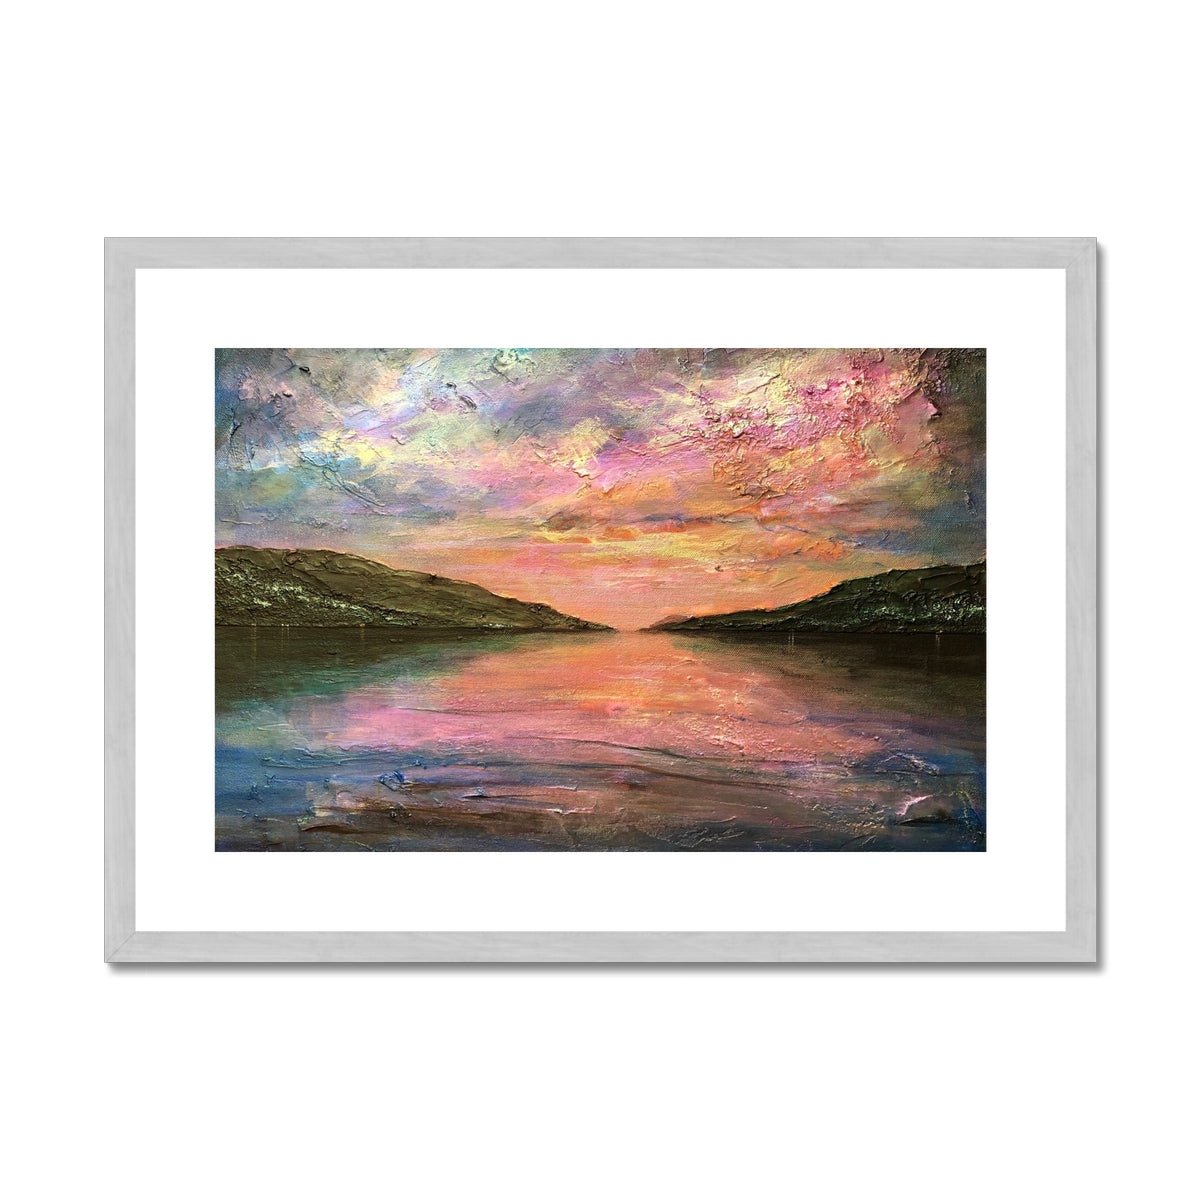 Loch Ness Dawn Painting | Antique Framed & Mounted Prints From Scotland-Antique Framed & Mounted Prints-Scottish Lochs & Mountains Art Gallery-A2 Landscape-Silver Frame-Paintings, Prints, Homeware, Art Gifts From Scotland By Scottish Artist Kevin Hunter